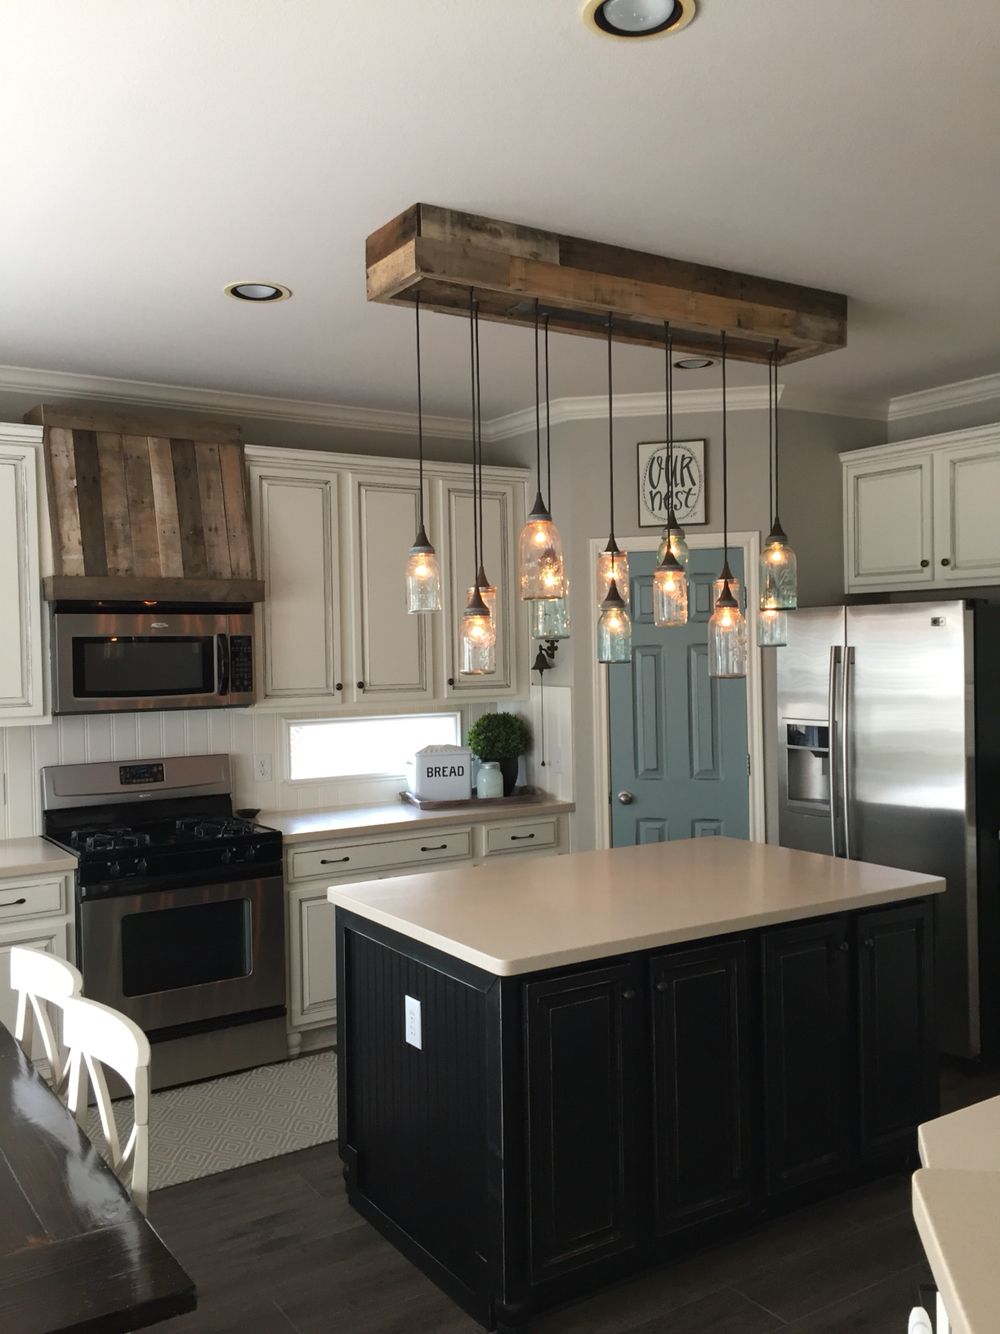 Kitchen lighting Hello everyone!  updated pictures @ourfauxfarmhouse on ig.  come follow!  Many Thanks!  {Holly} HWVGALJ